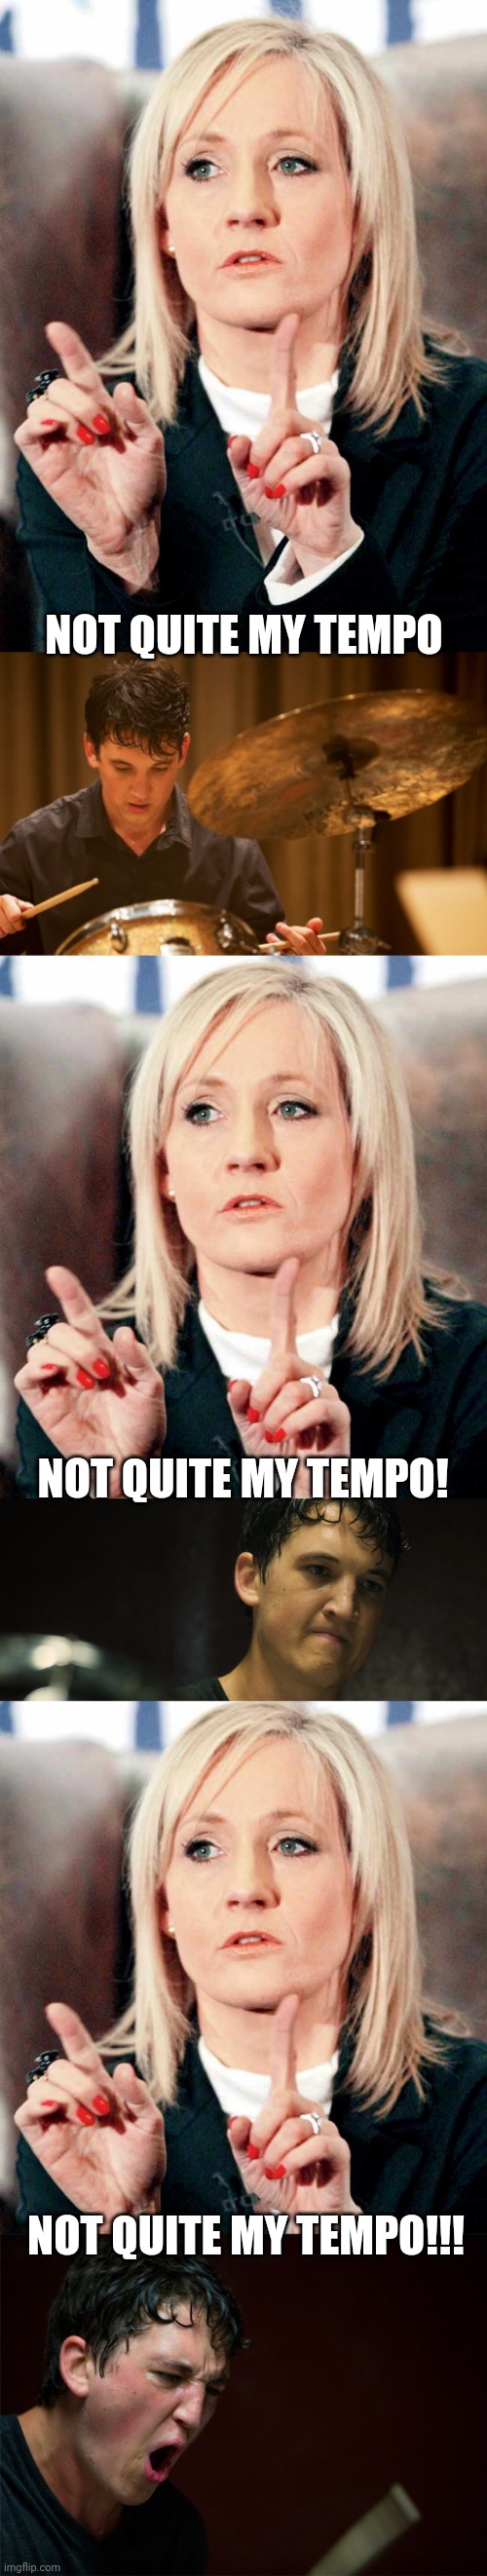 Magic in these fingers: J.K Whiplash |  NOT QUITE MY TEMPO; NOT QUITE MY TEMPO! NOT QUITE MY TEMPO!!! | image tagged in j k rowling,whiplash,music,movies | made w/ Imgflip meme maker